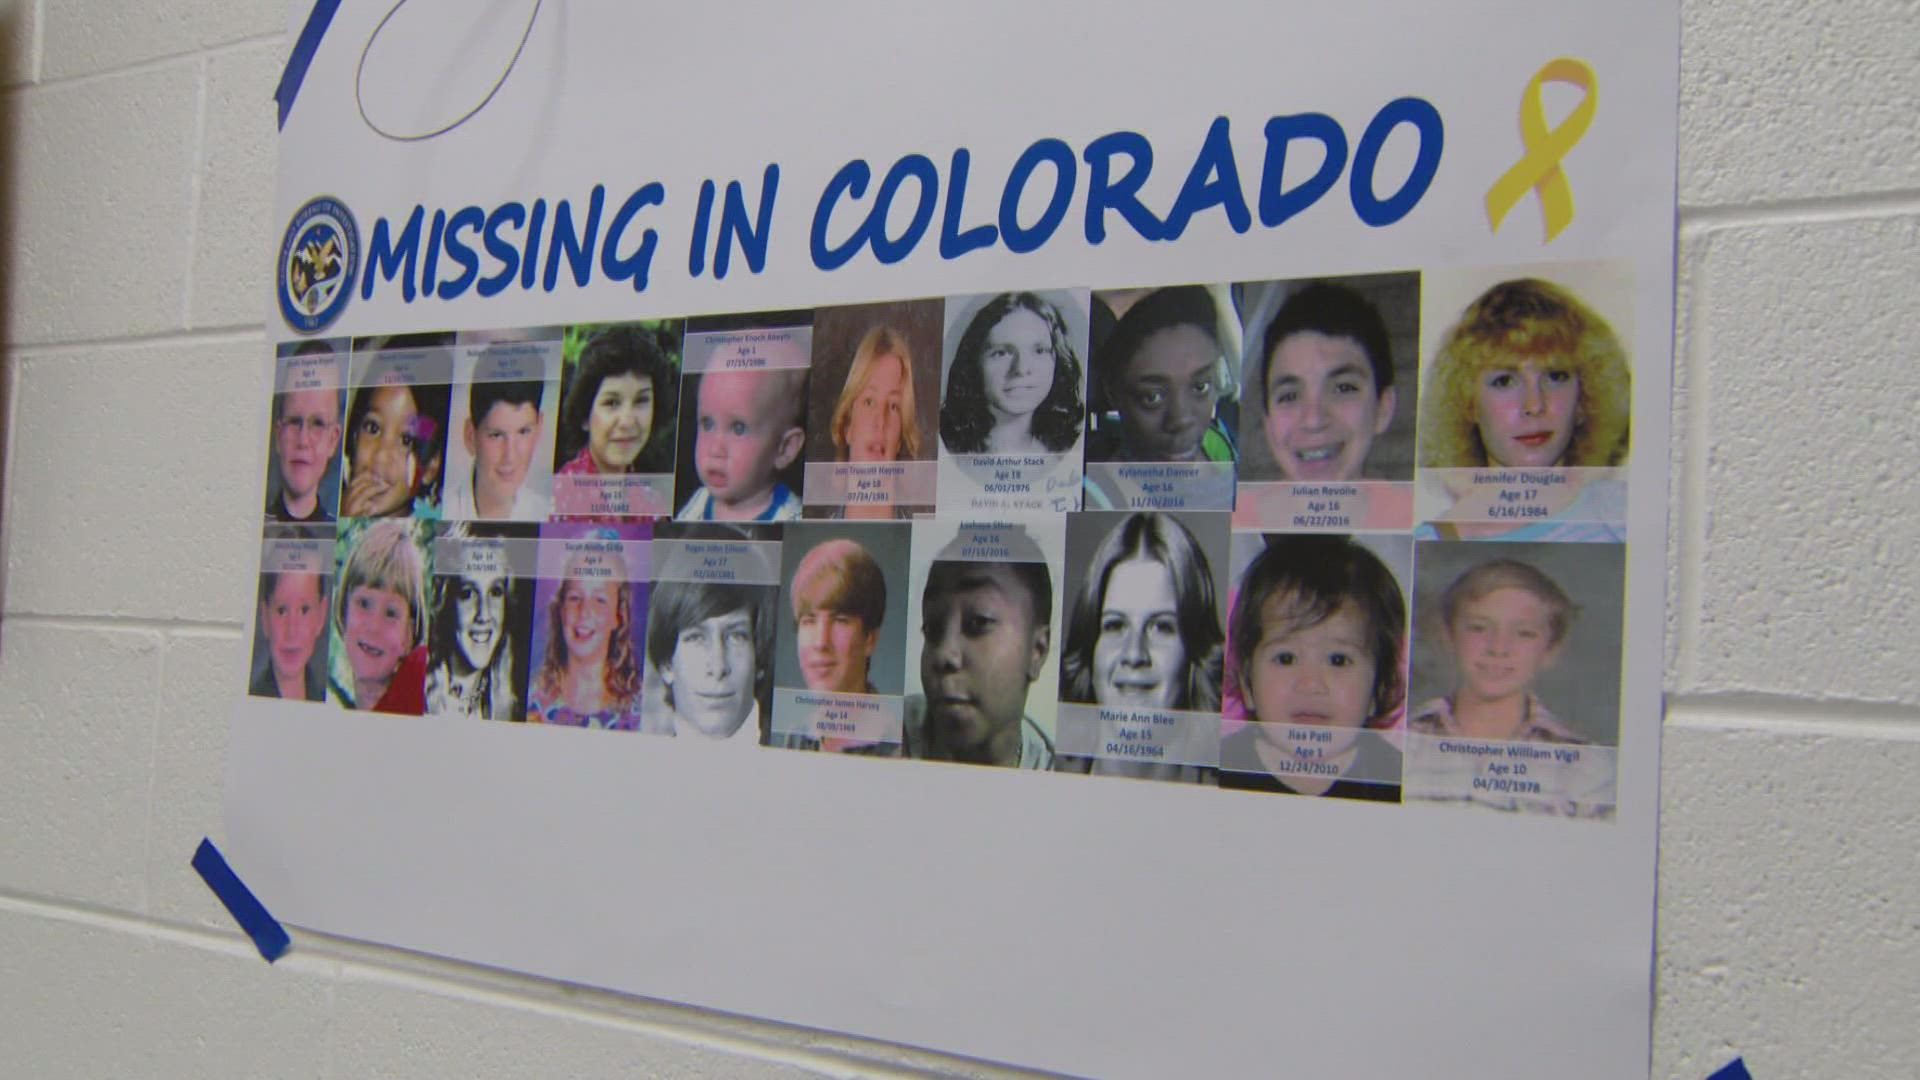 The Missing in Colorado event let families enter photos, dental records and DNA into a national missing person database.